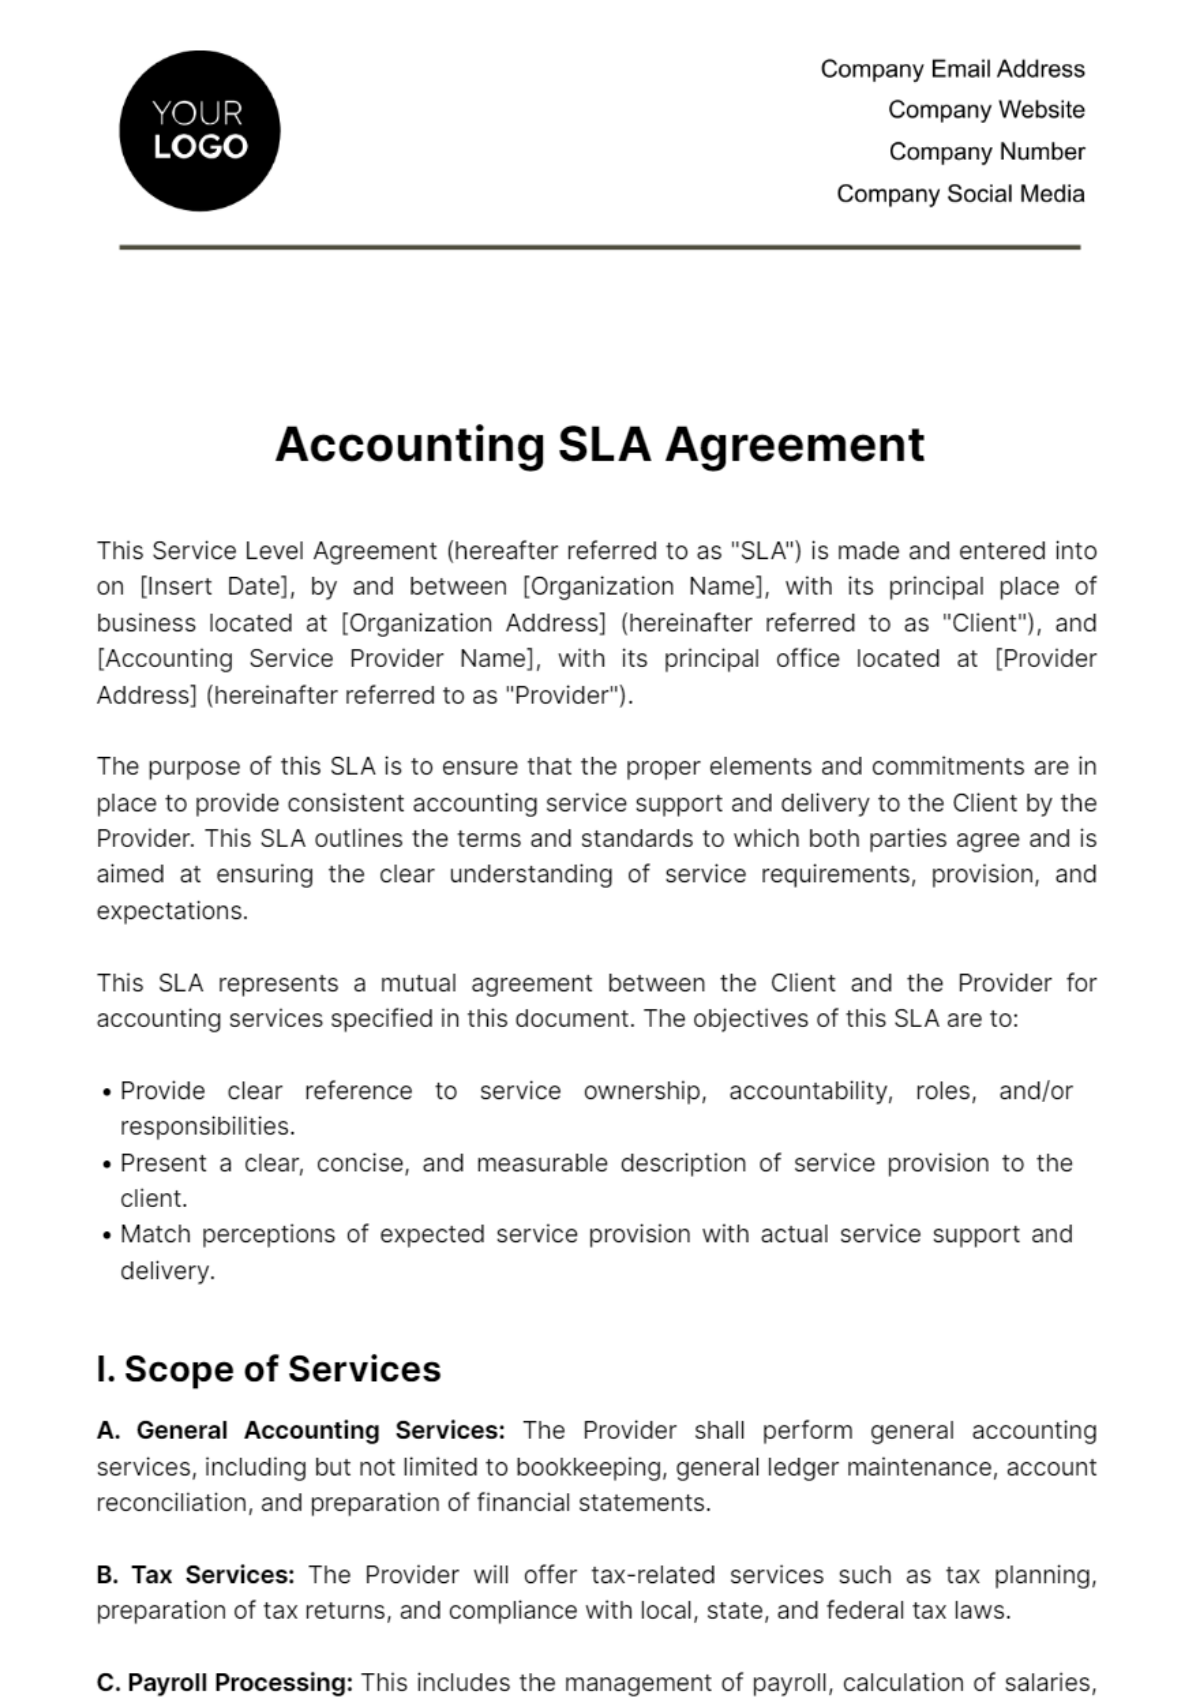 Accounting SLA Agreement Template